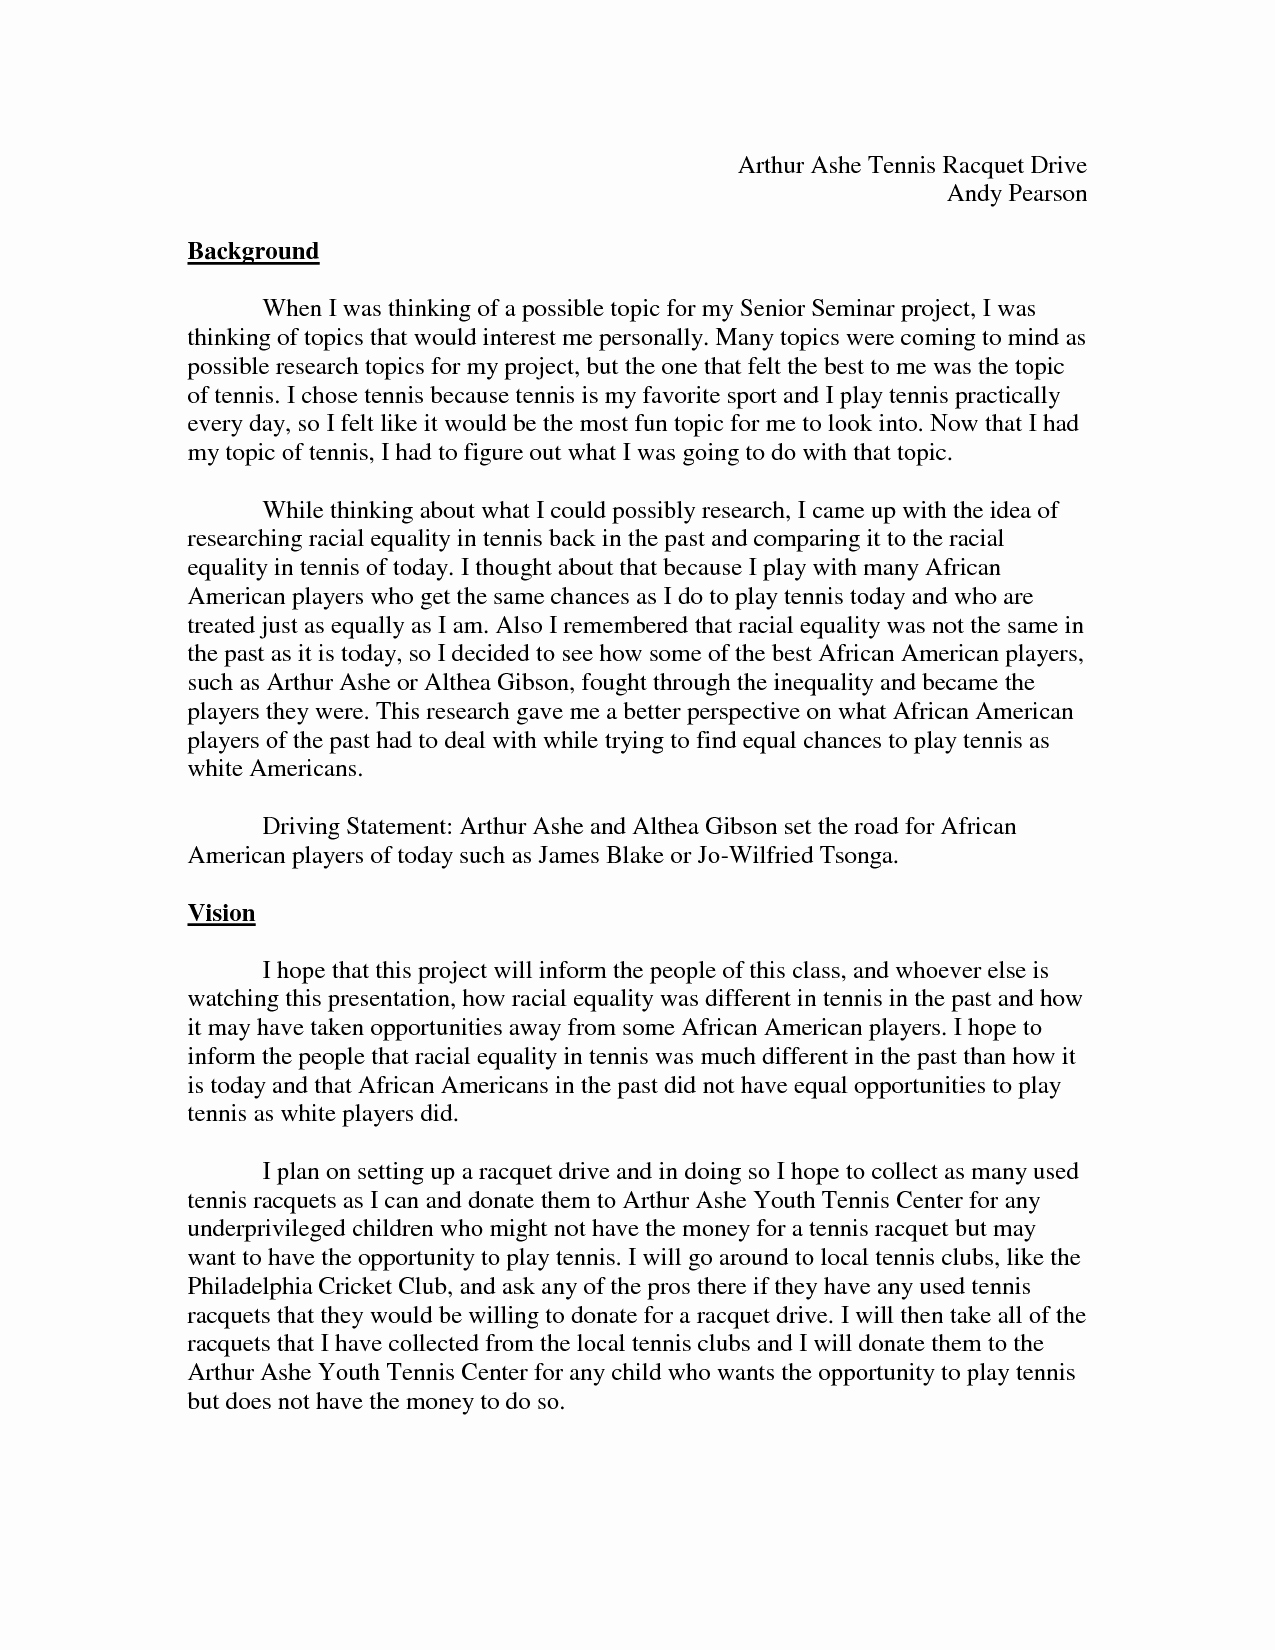 Sample Of A Research Paper New Writing the College Essay What Colleges Want to See Can